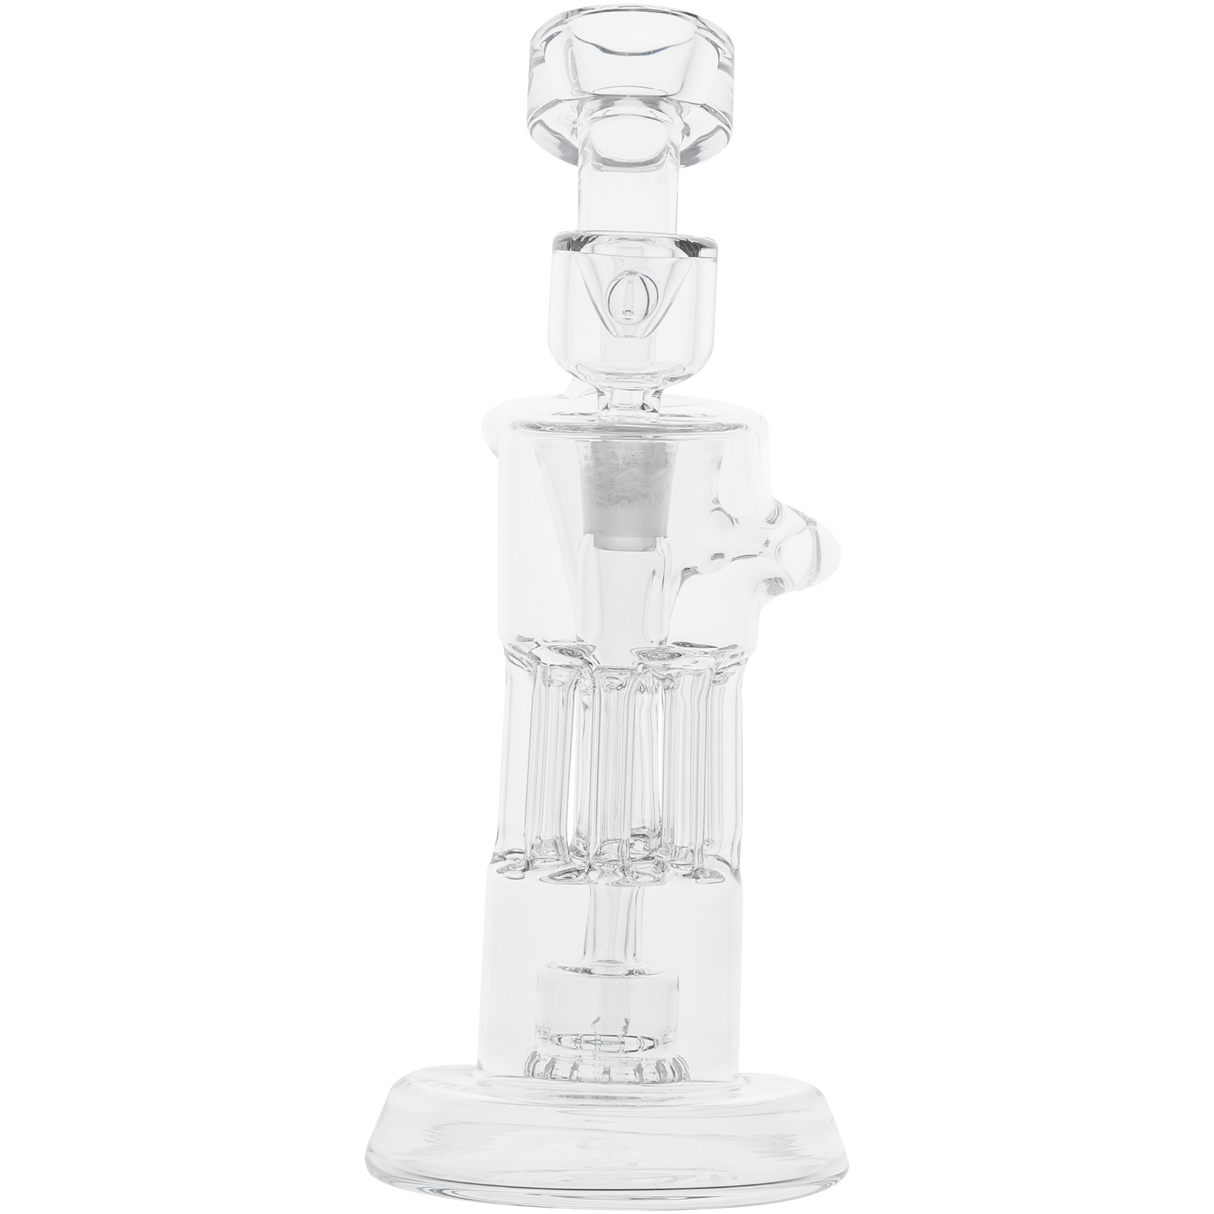 Cookies Flowcycler Dab Rig featuring Borosilicate Glass with Recycler Percolator - Clear Frontal View